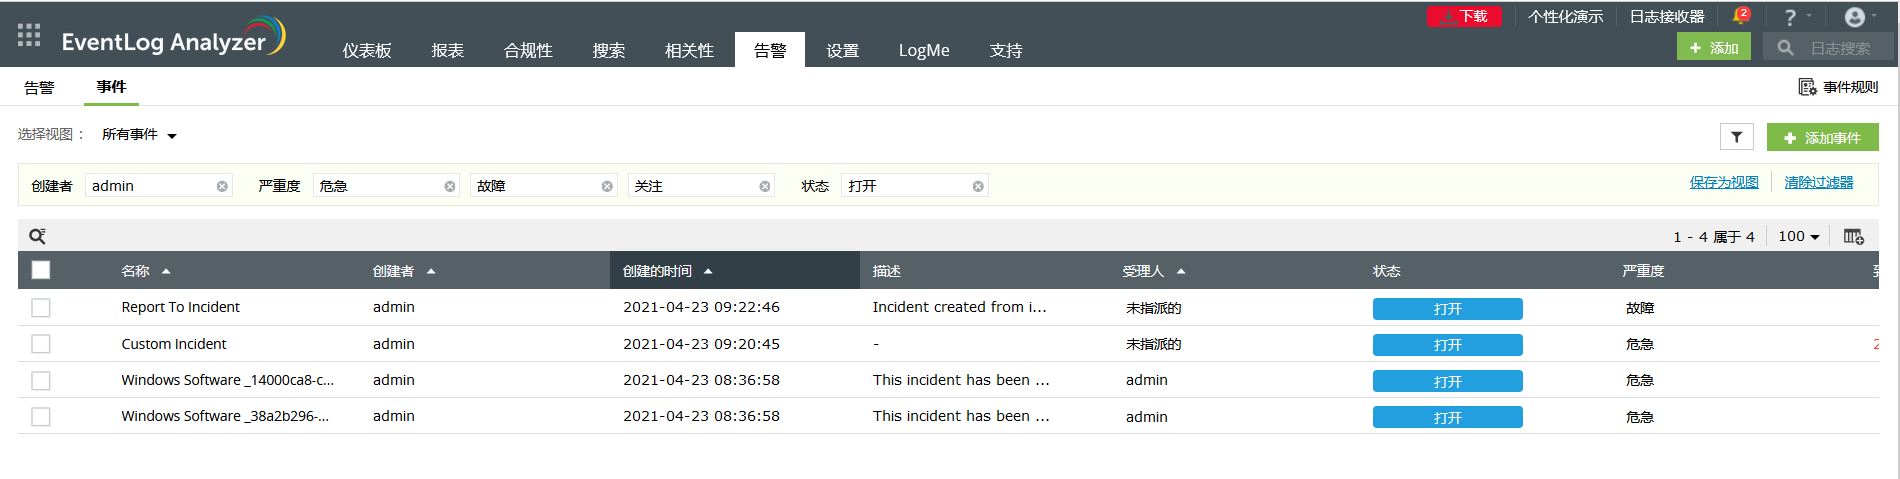 Steps to map reports as incidents